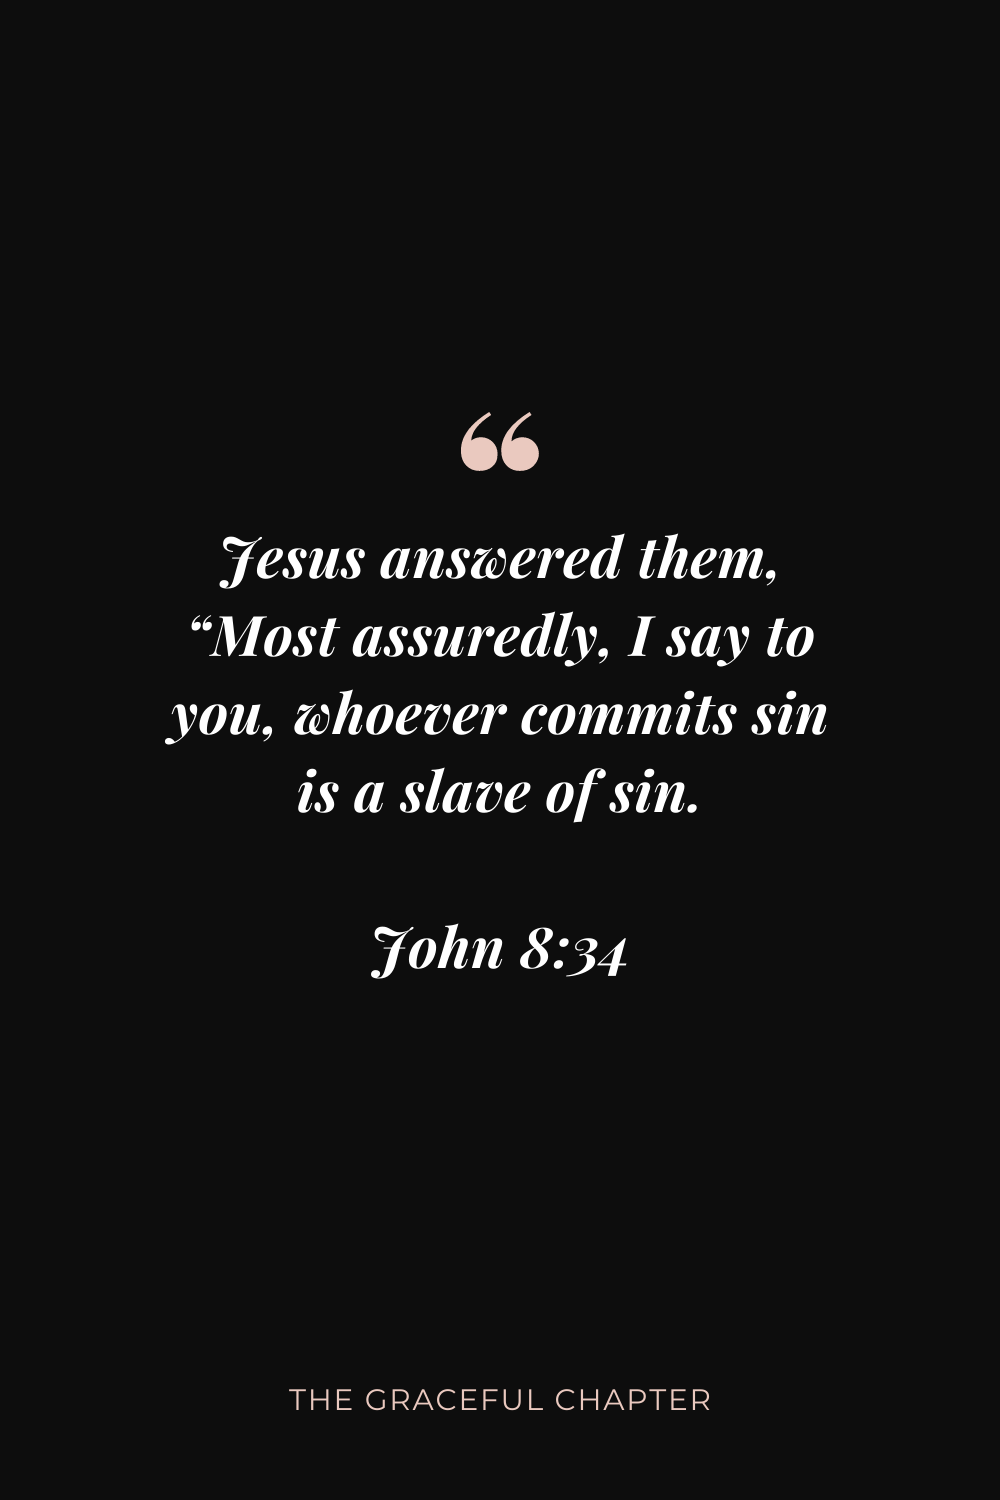 Jesus answered them, “Most assuredly, I say to you, whoever commits sin is a slave of sin. John 8:34